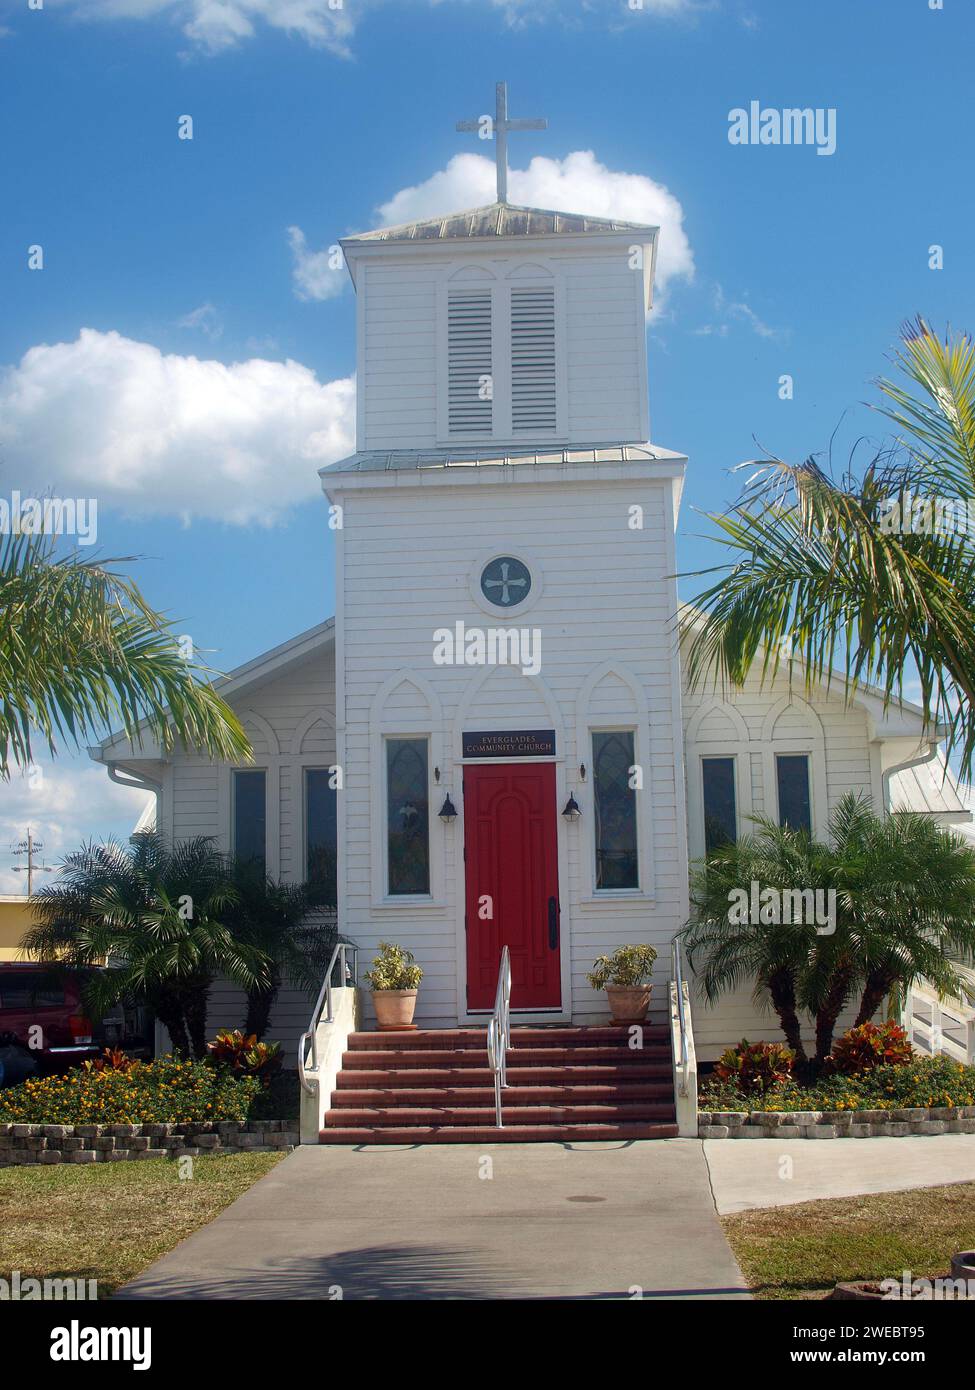 Everglades City, Florida, United States - February 10, 2013: The old building of Everglades Community Church. Stock Photo